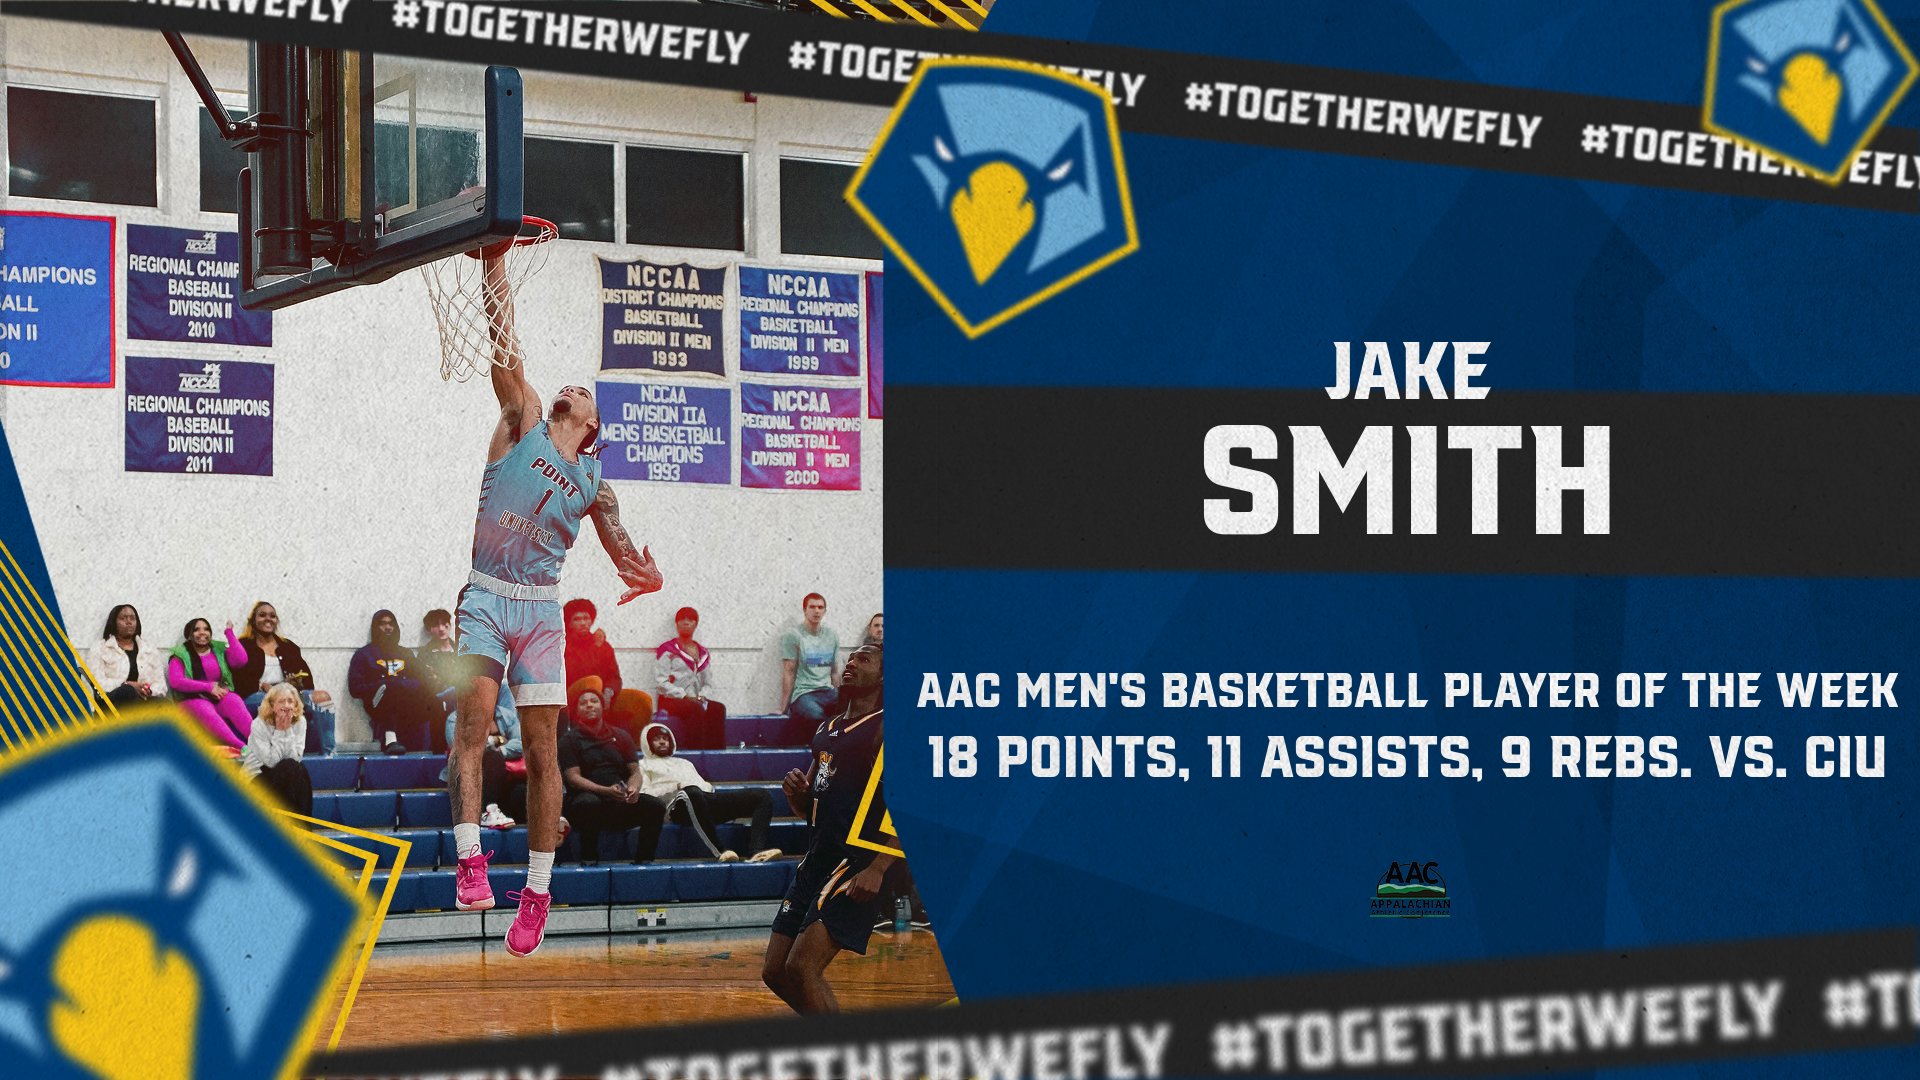 Jake Smith’s floor general ways earns him AAC Men’s Basketball Player of the week